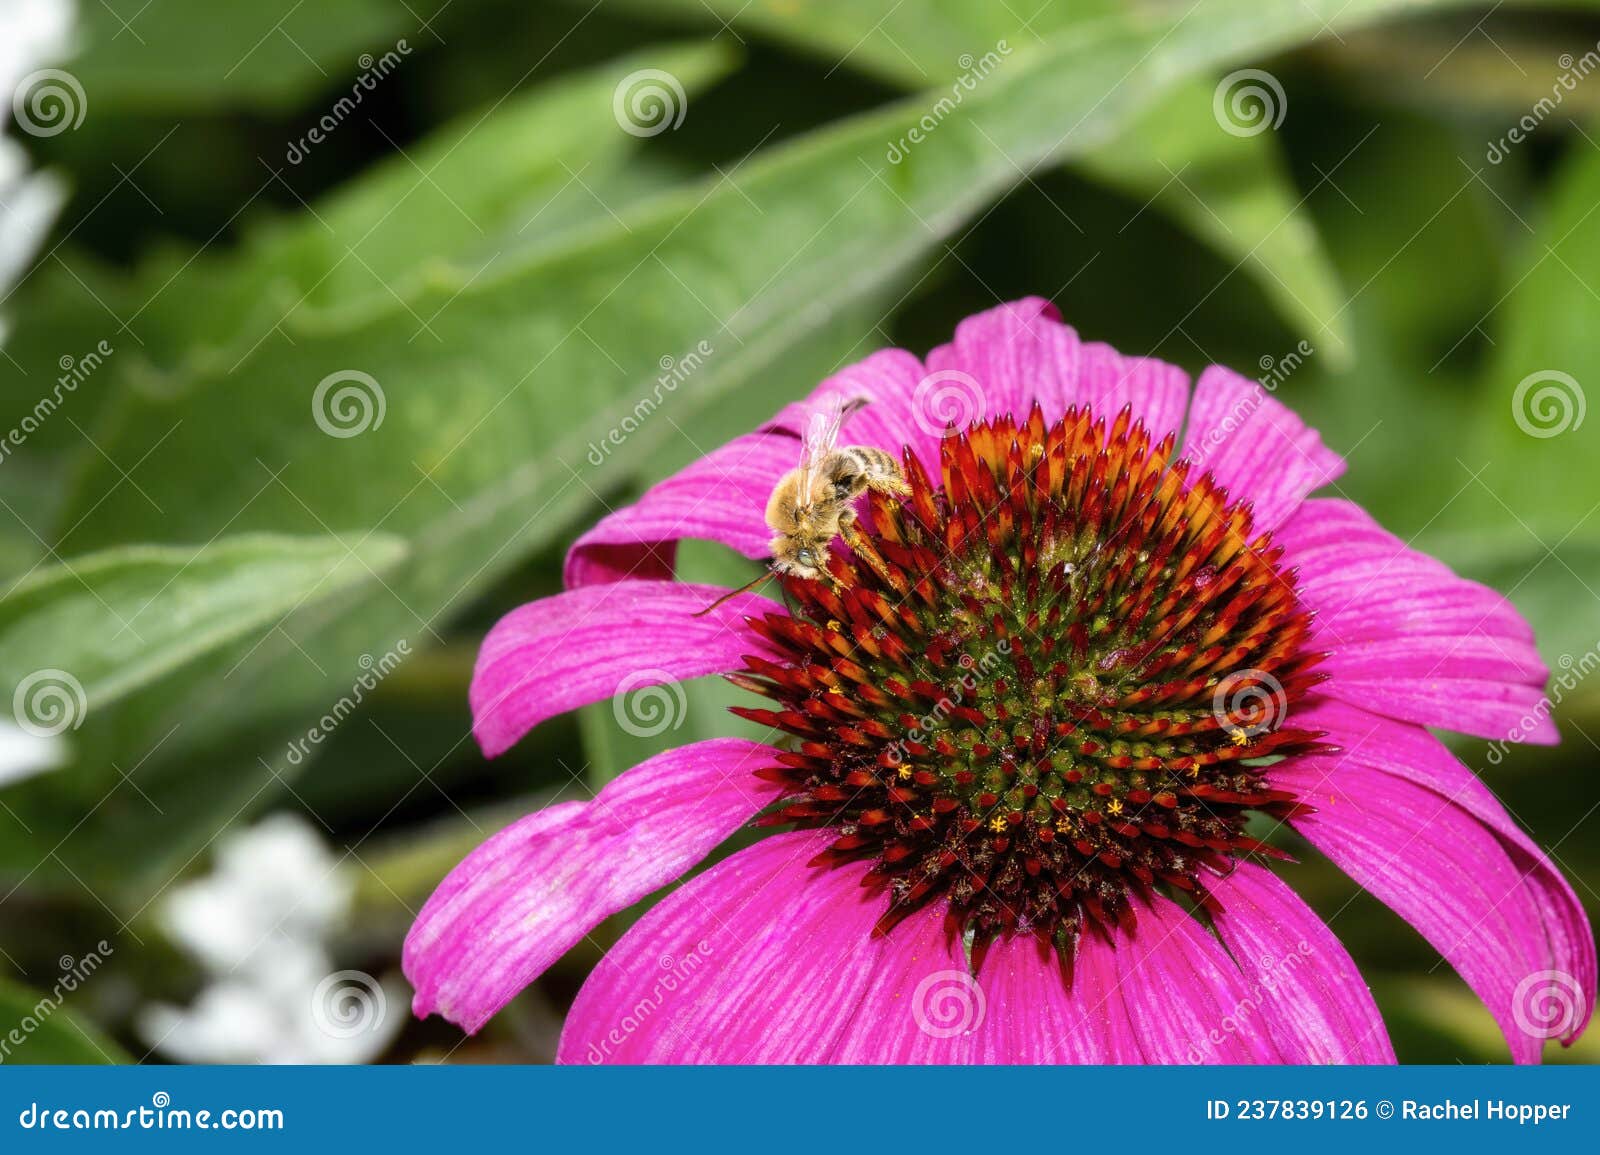 a long-horned bee in the genus melissodes famnily apidae gathers pollen on a bright magenta flower